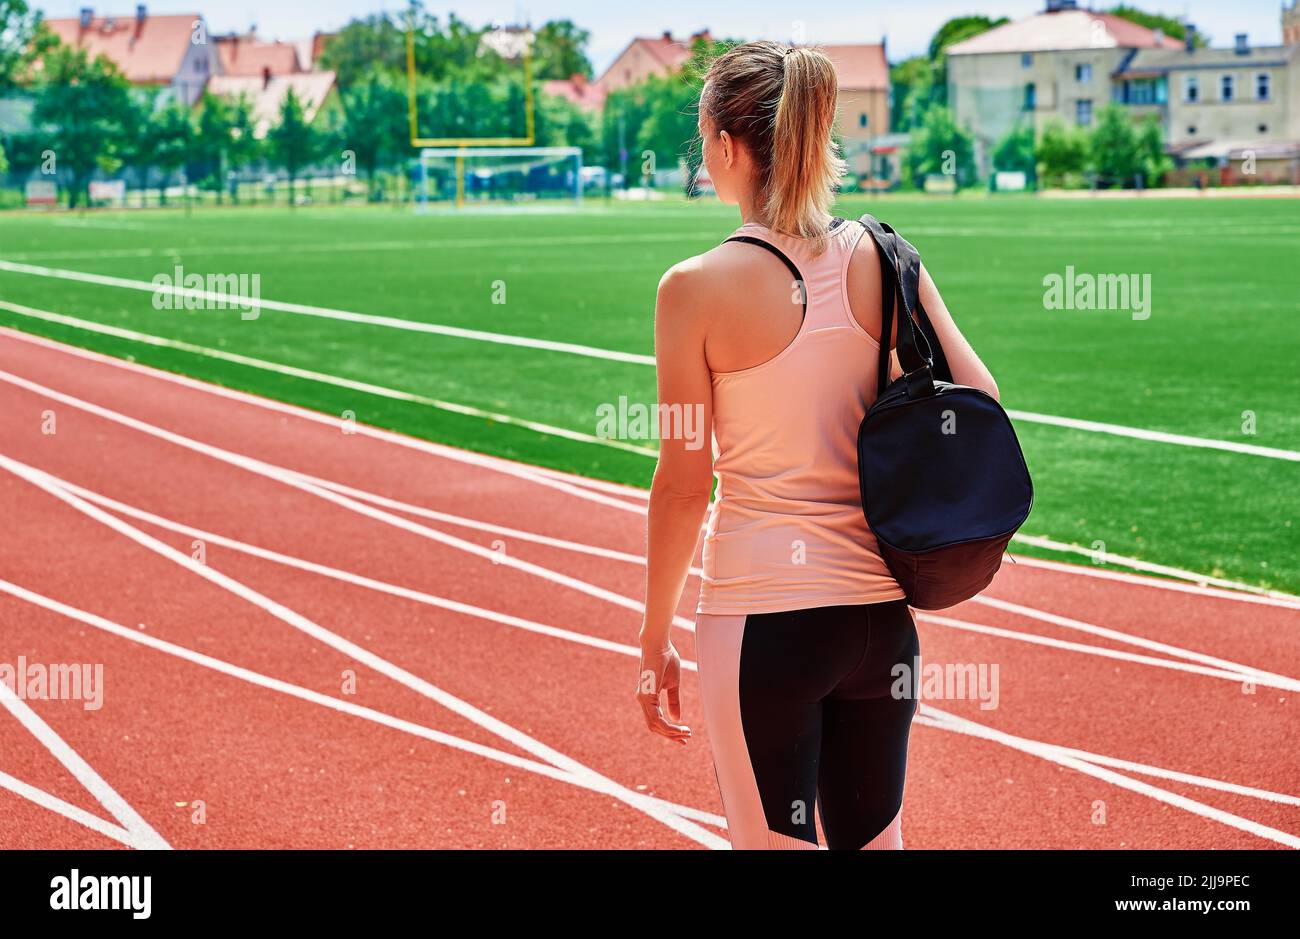 Back view of girl with sport bag at stadium track, Woman going on fitness training at summer day Stock Photo